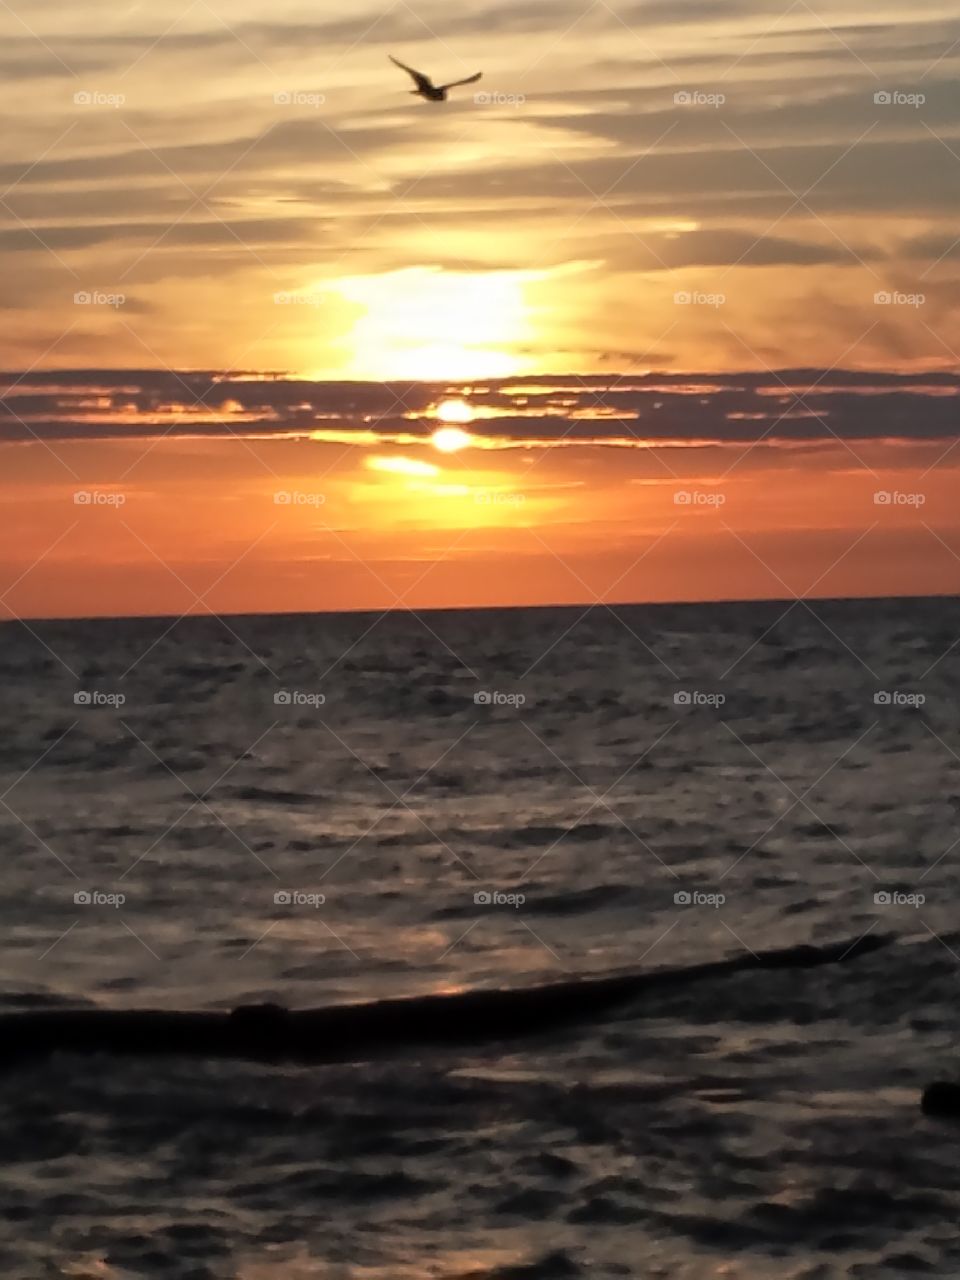 View of lake erie during Sunset